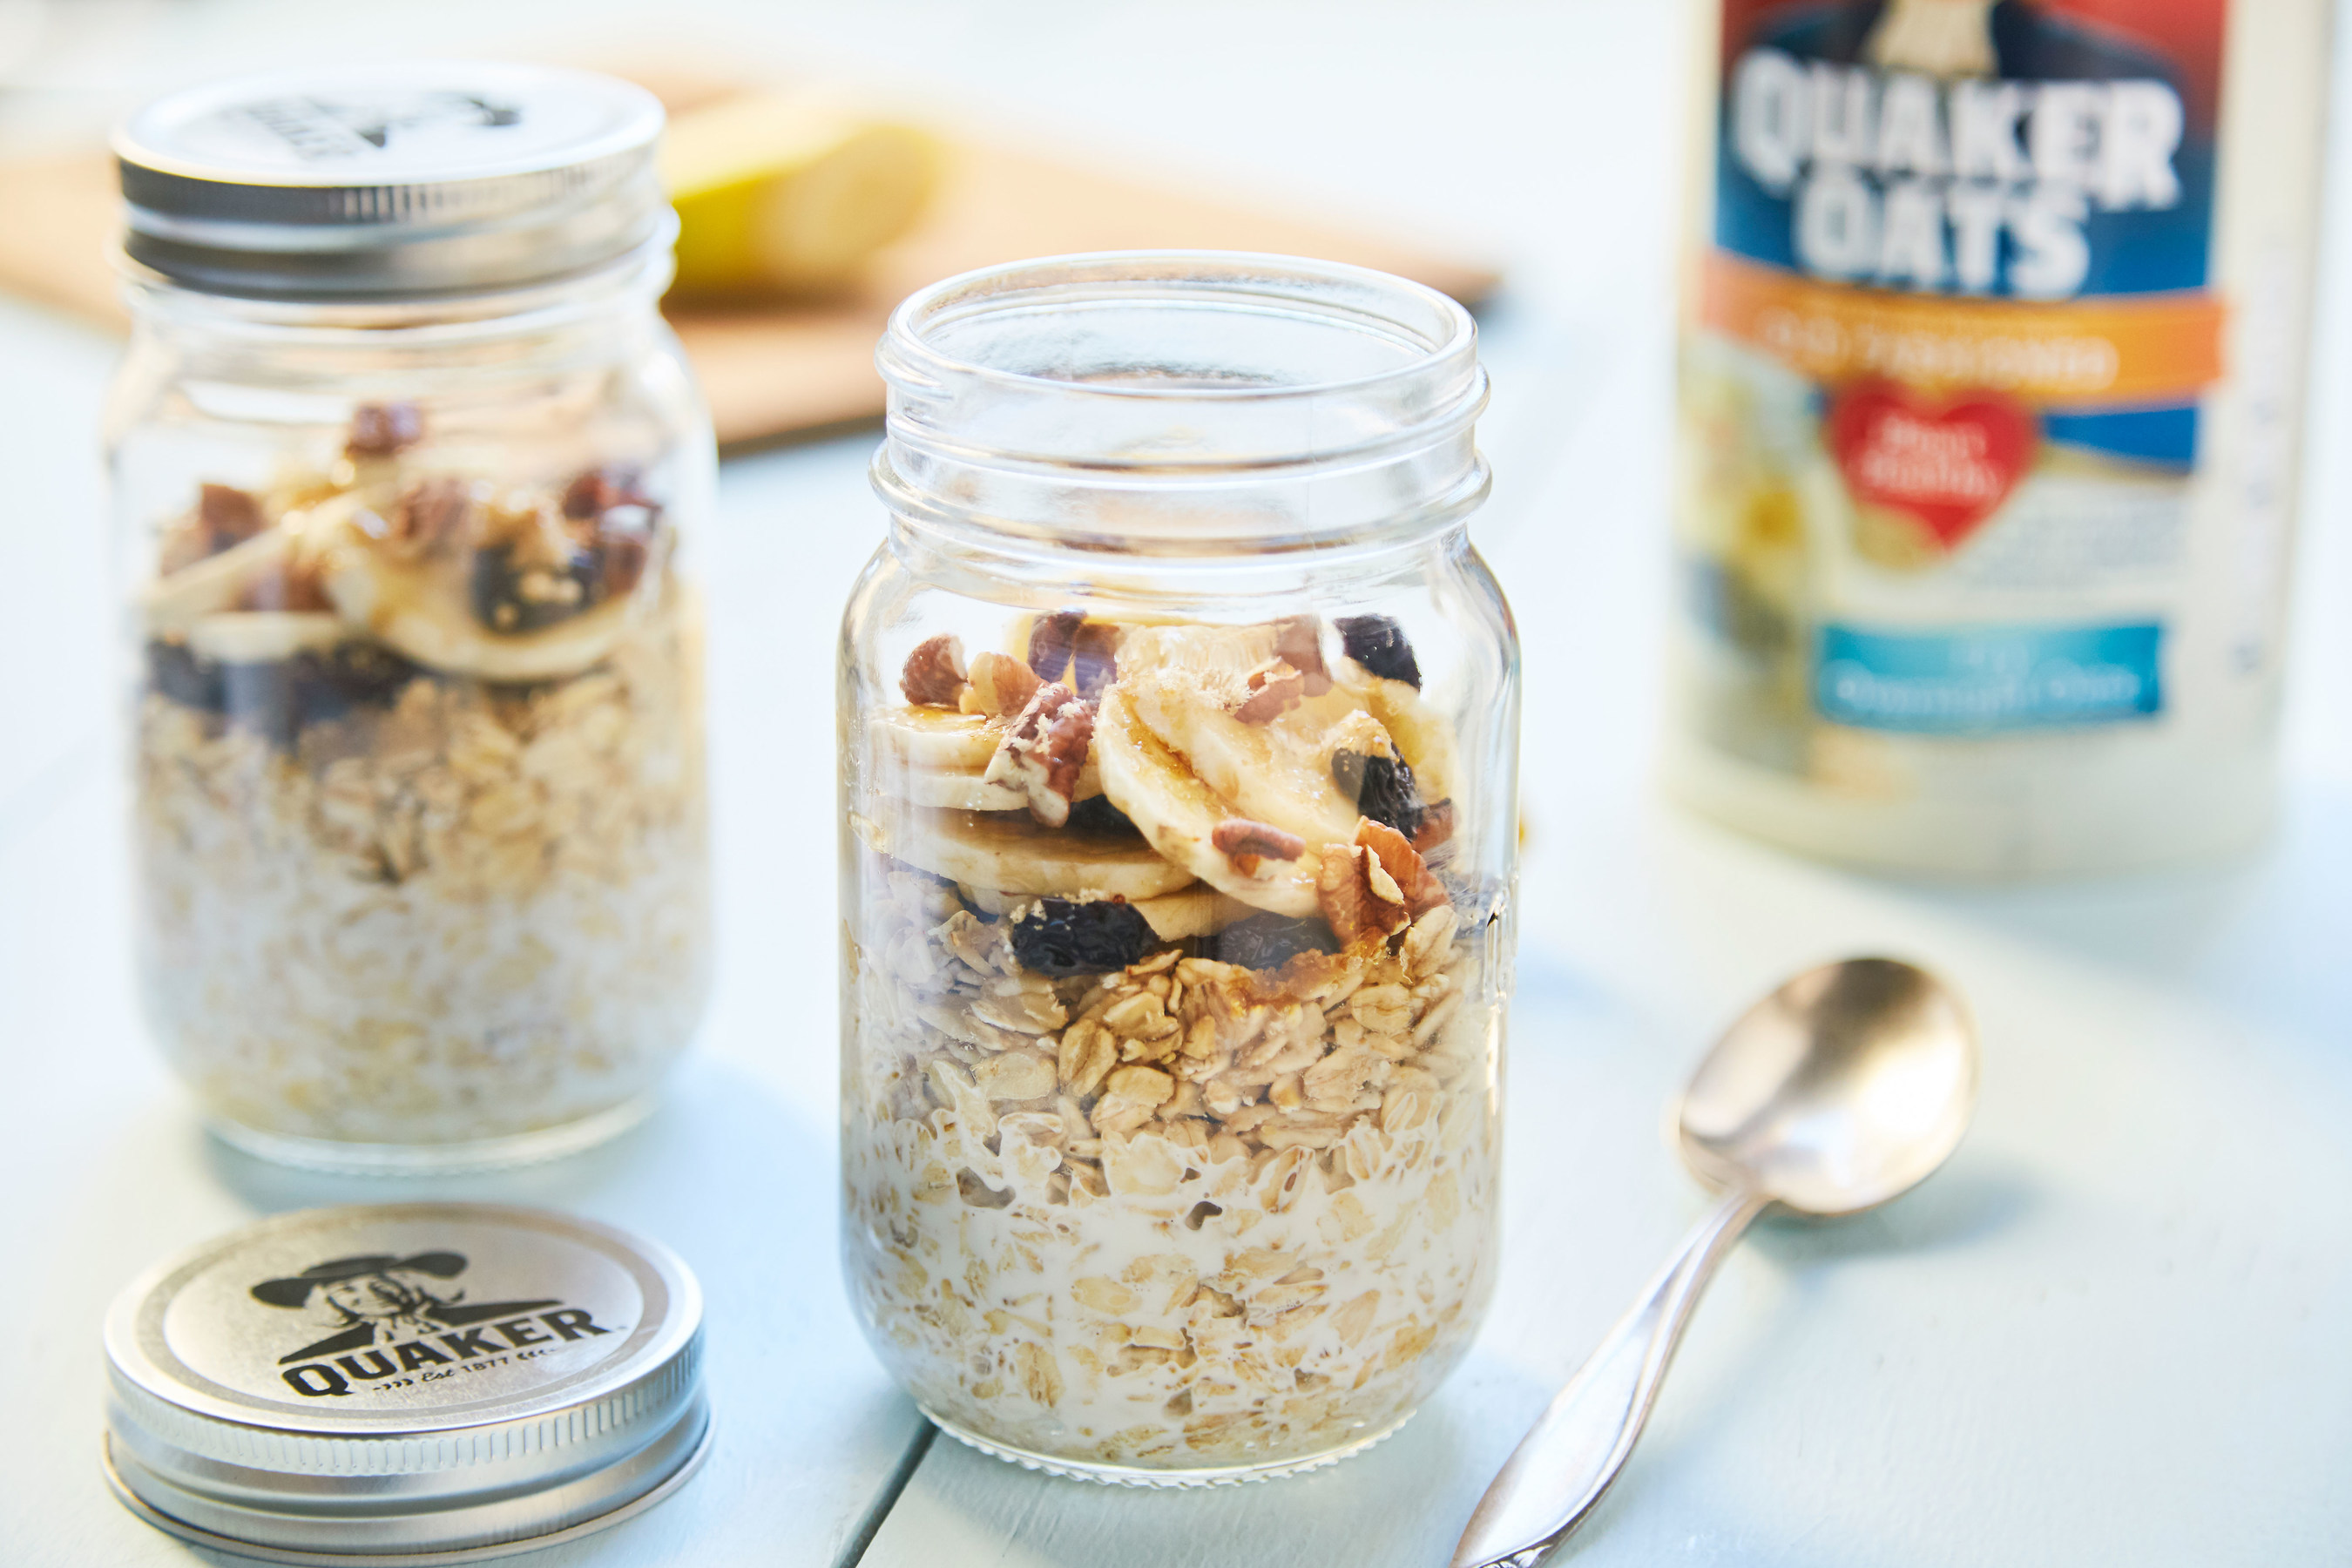 Beginning Tuesday, Dec. 6, Chef'd will add three Quaker Overnight Oats meals to its meal-kit marketplace, making it one of the only major meal delivery services to offer breakfast. At $10 for a double serving, consumers will be able to choose between Blueberry Honey, Strawberry Blueberry Maple Syrup or Dried Cherry Banana Pecan & Brown Sugar Overnight Oats meals - all featuring Quaker Old Fashioned Oats.